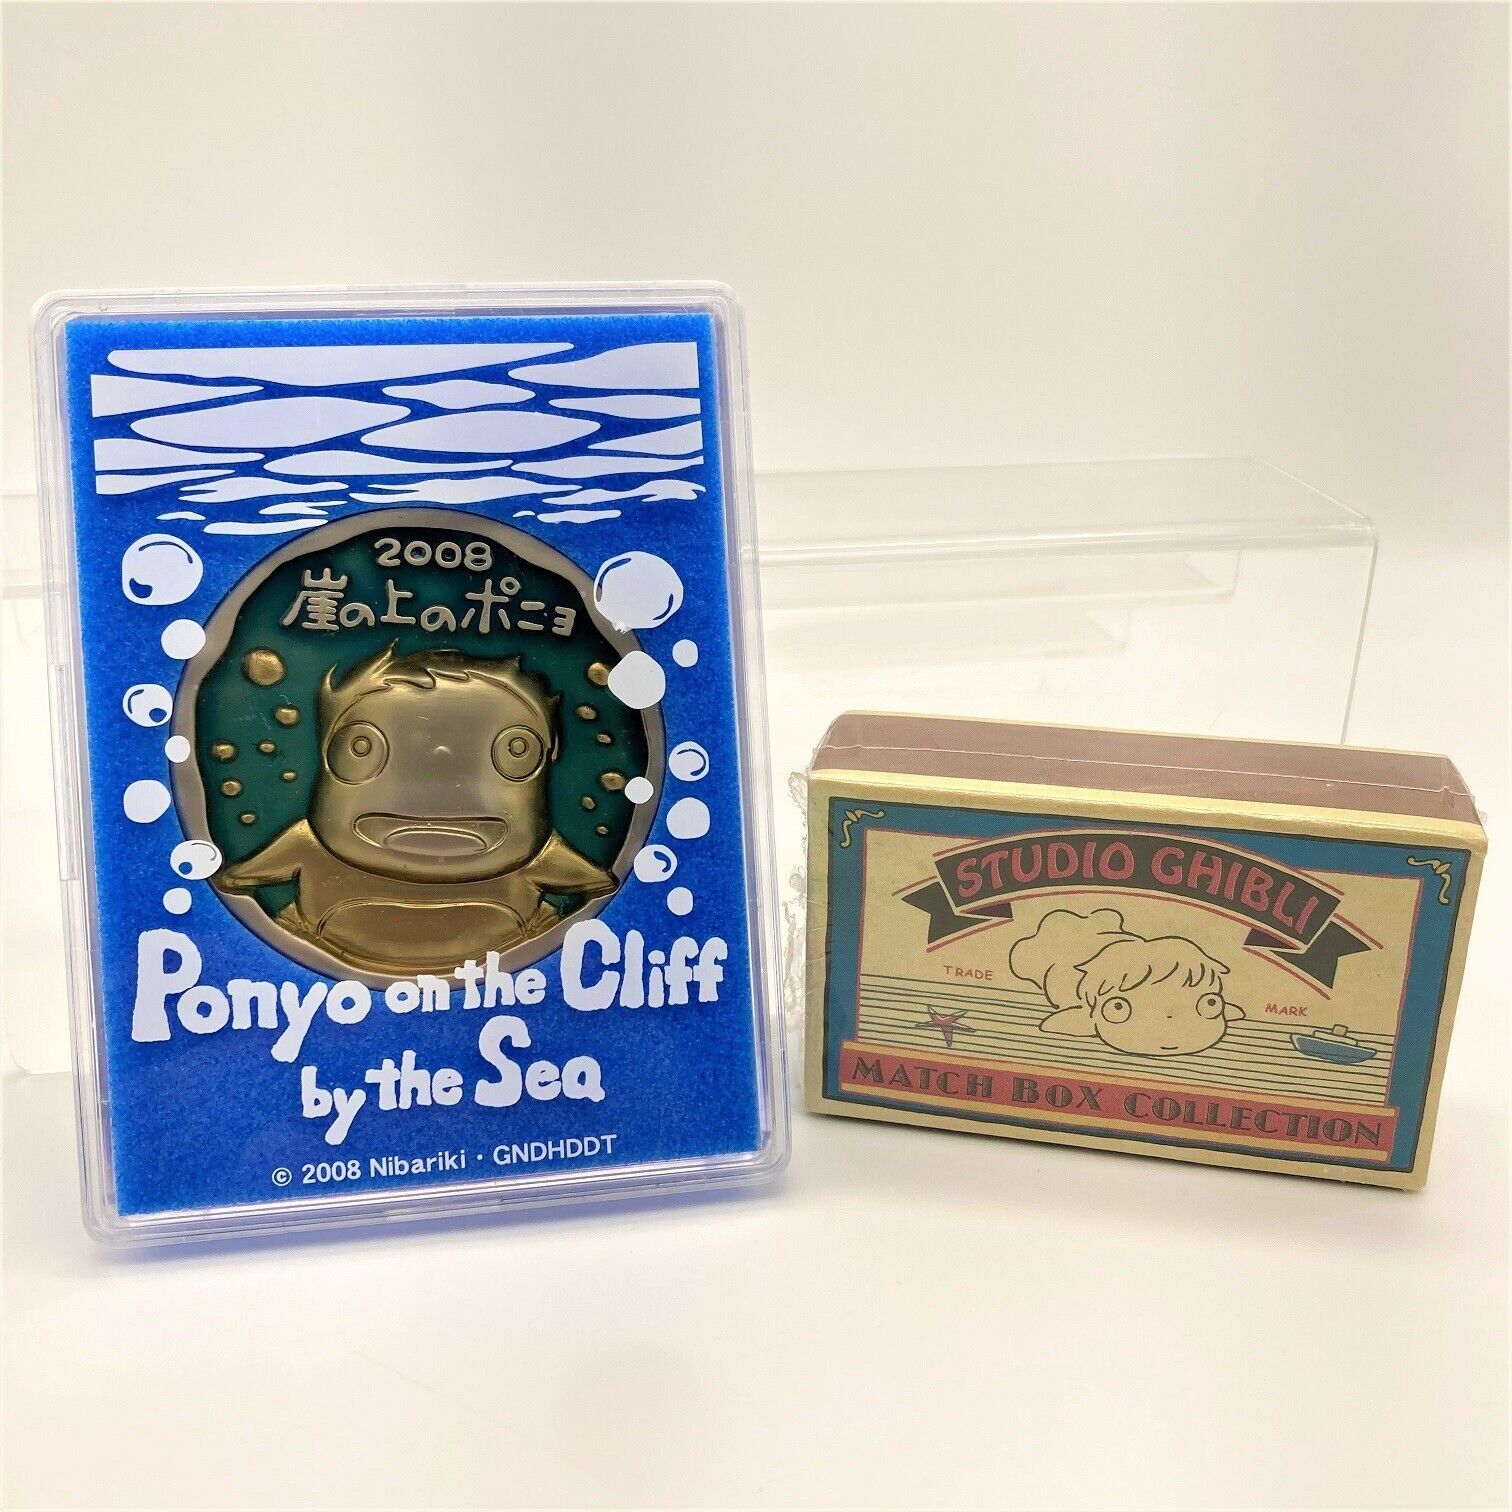 Ponyo on the Cliff Commemorative Medal 2008 & Matchbox Collection Rare USED F/S